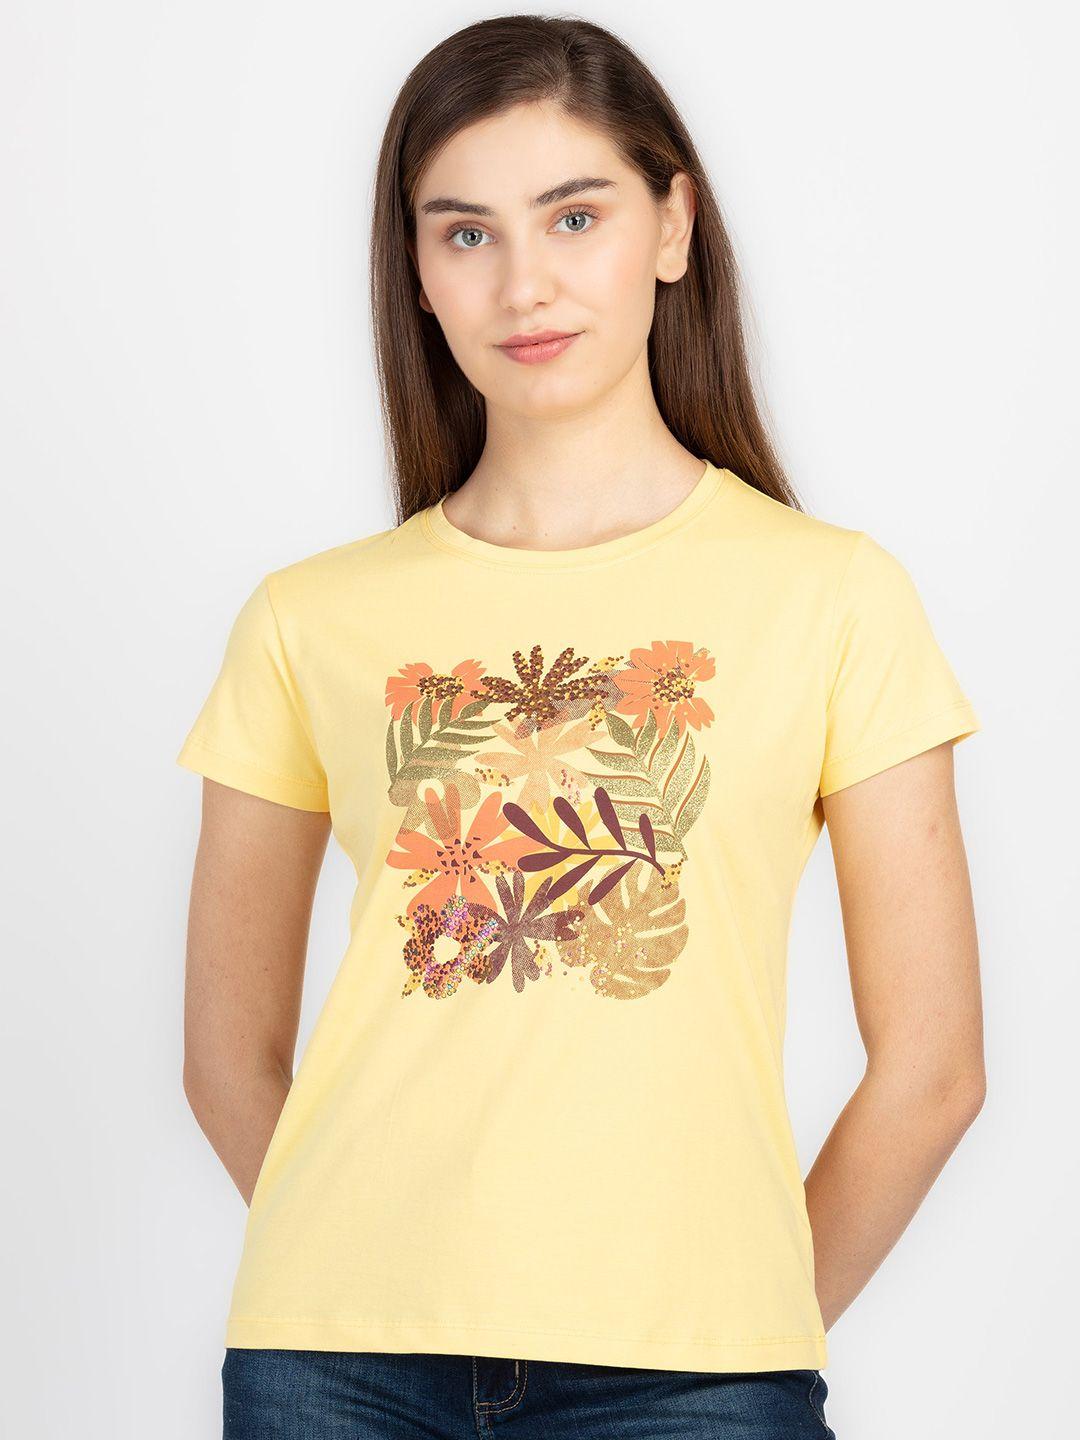 status quo round neck short sleeves floral printed tropical cotton t-shirt